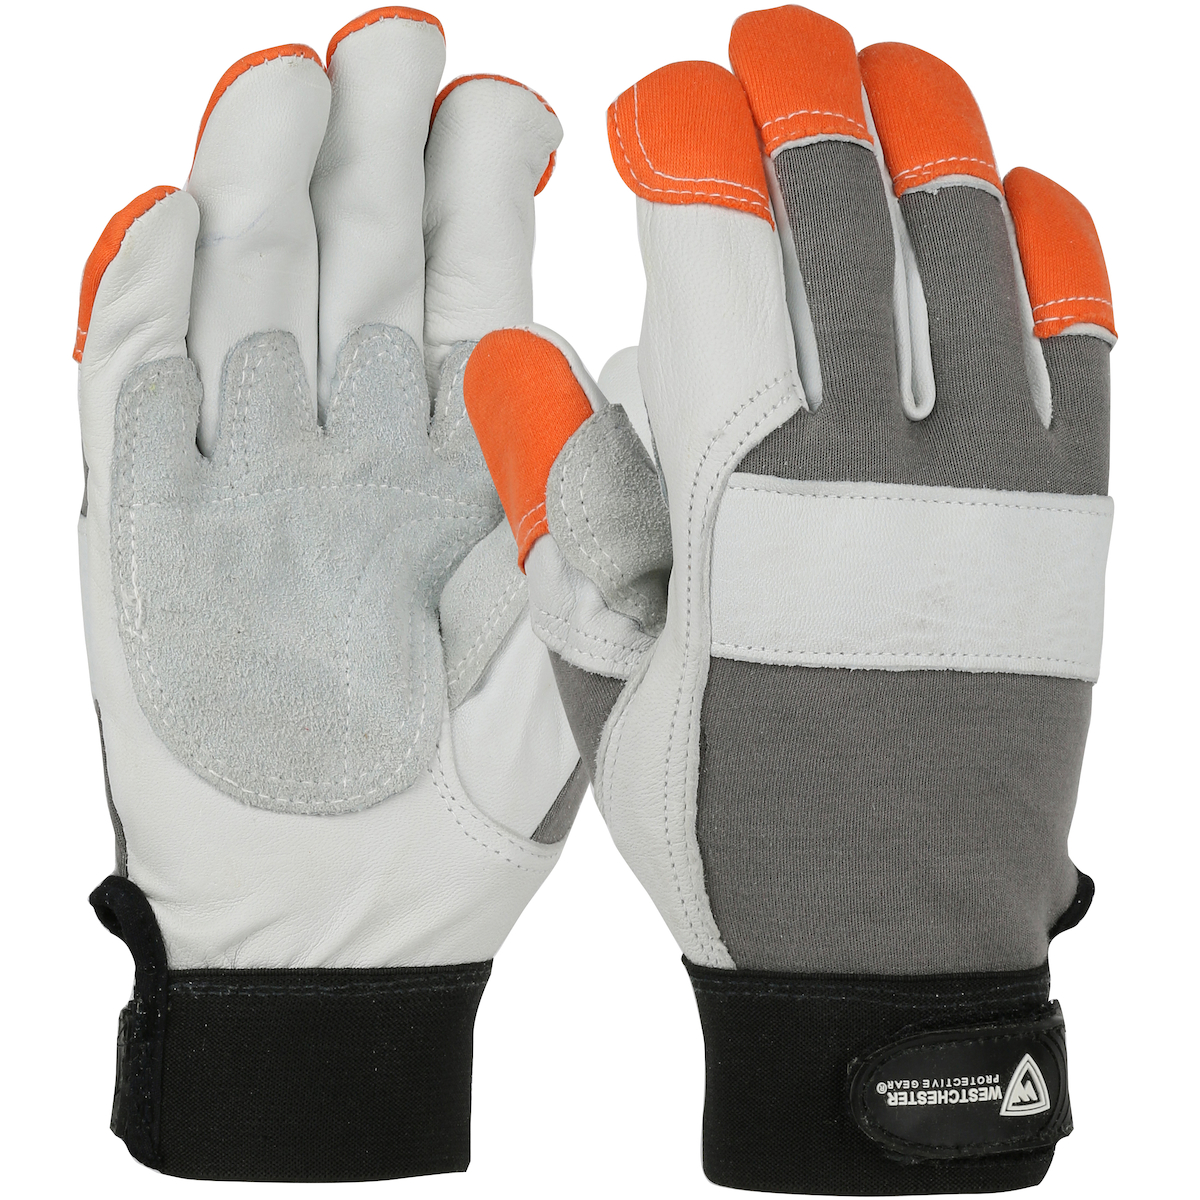 86565 PIP® Goatskin Leather Glove with Split Cowhide Palm Patch and Nomex® Back - Orange FR Fingertips